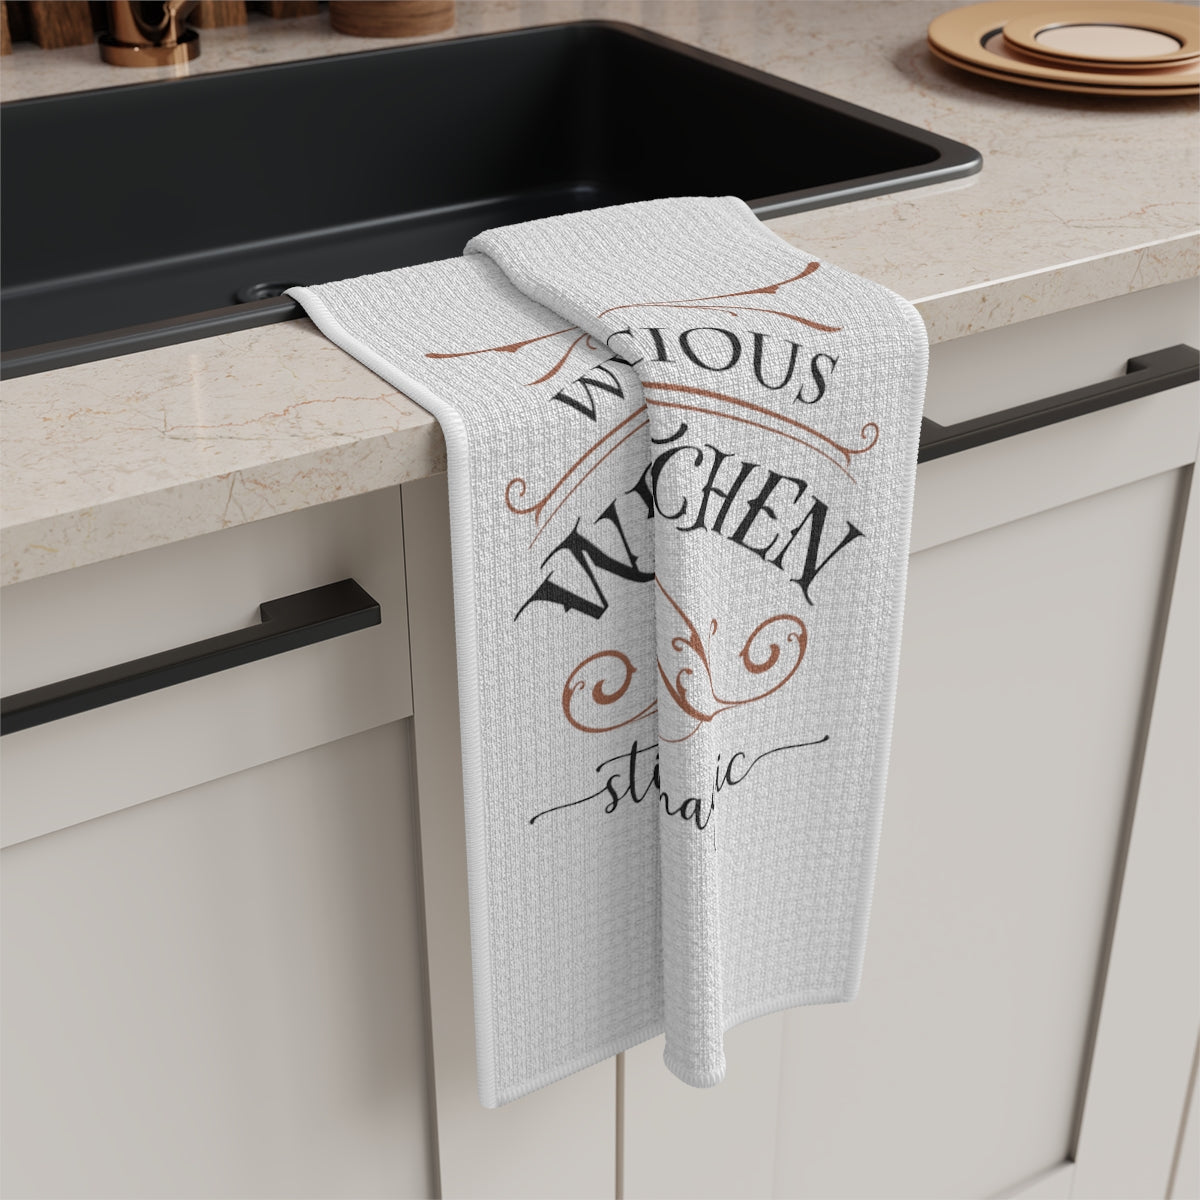 Wickedly Delicious Kitchen Tea Towel - Witchy Kitchens